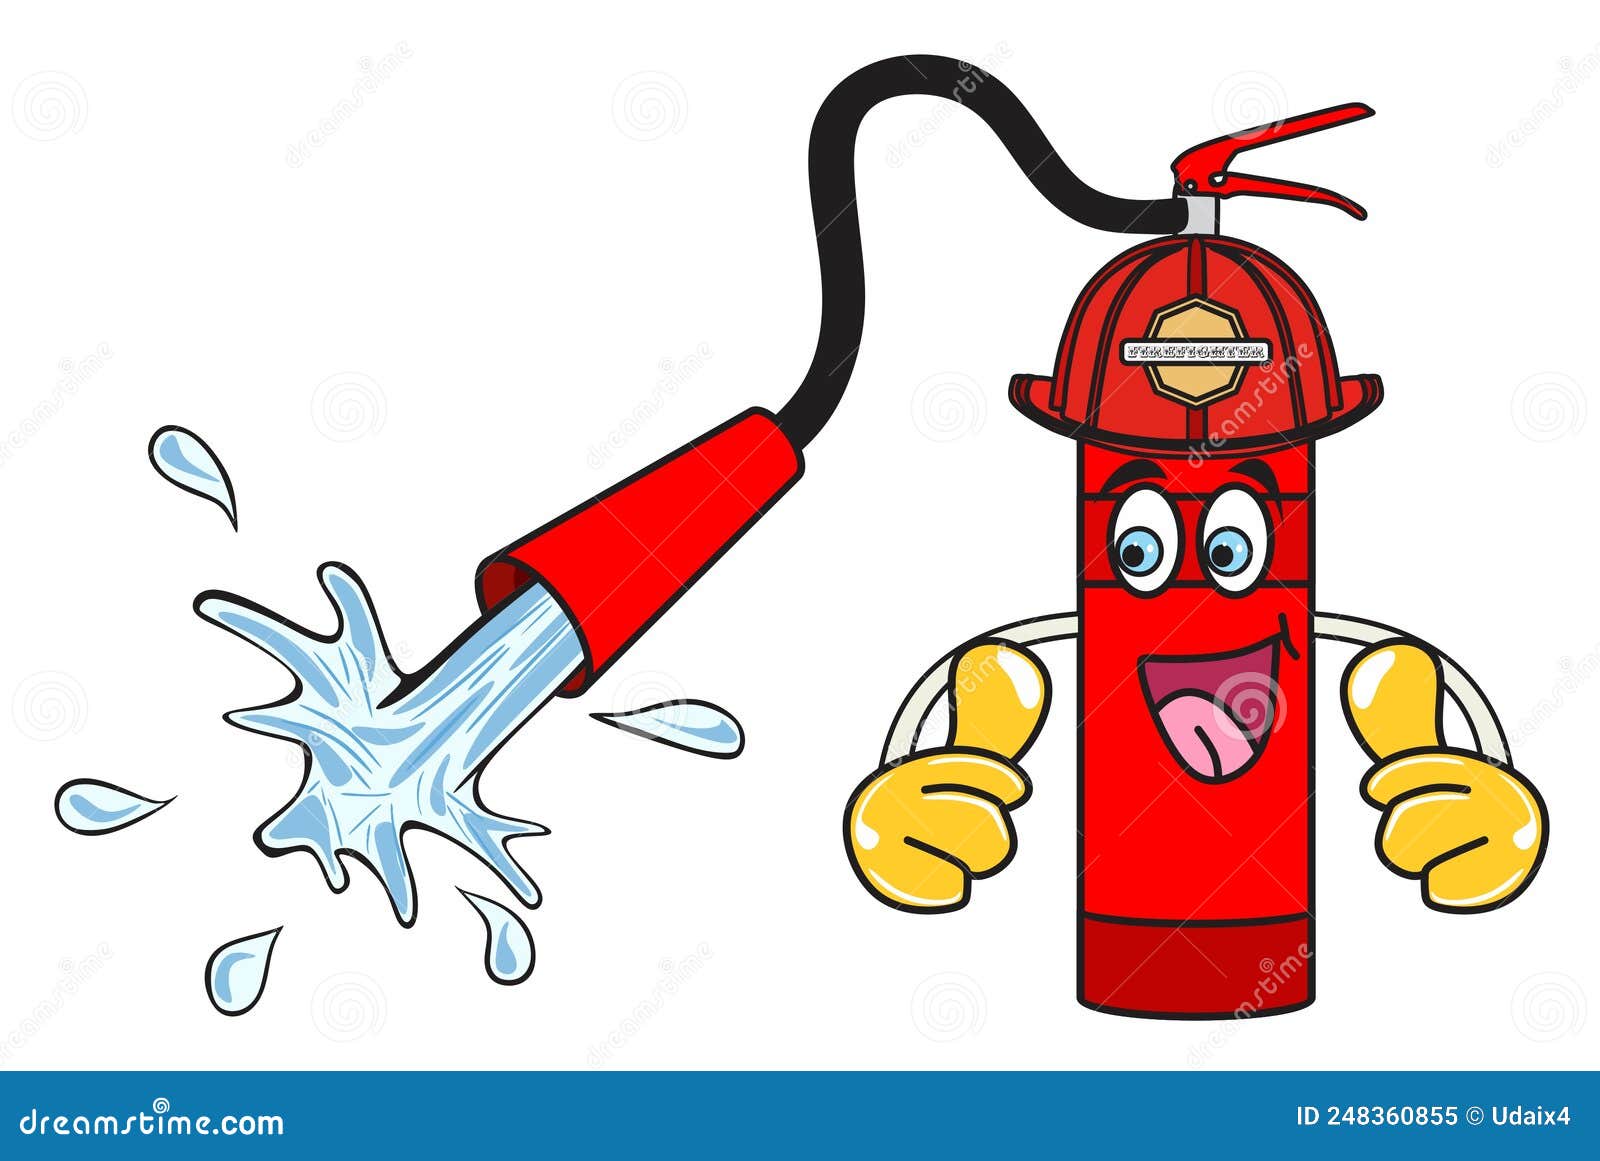 Firefighter Thumbs Up Stock Illustrations – 31 Firefighter Thumbs Up Stock  Illustrations, Vectors & Clipart - Dreamstime